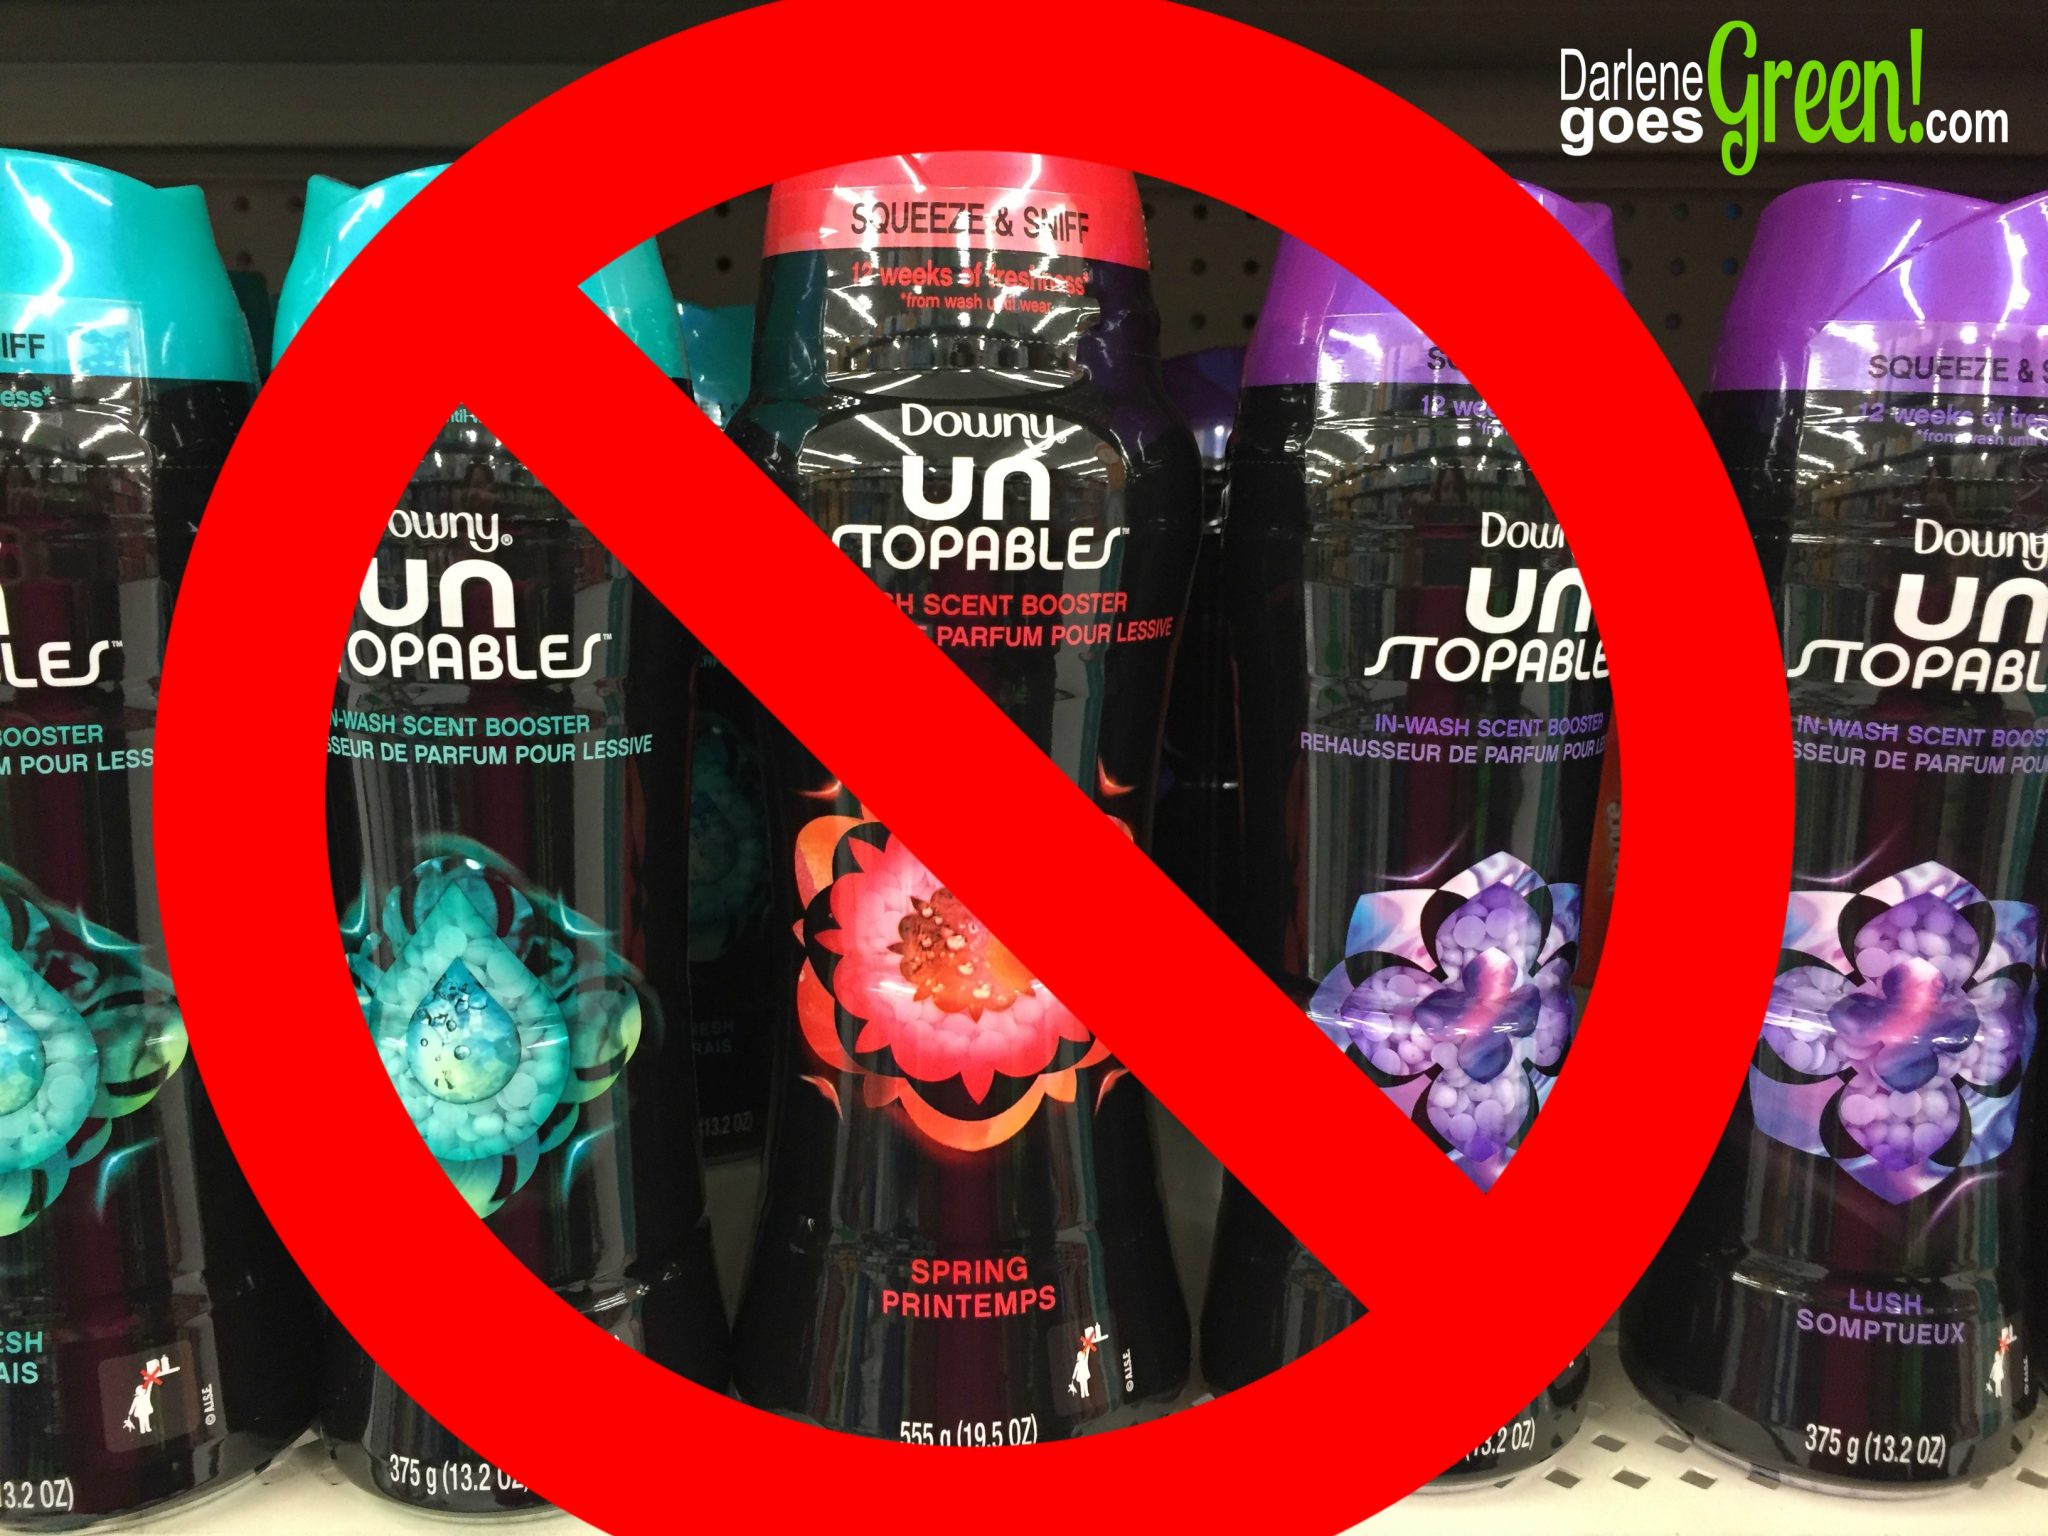 Are Laundry Scent Beads Bad for the Environment?